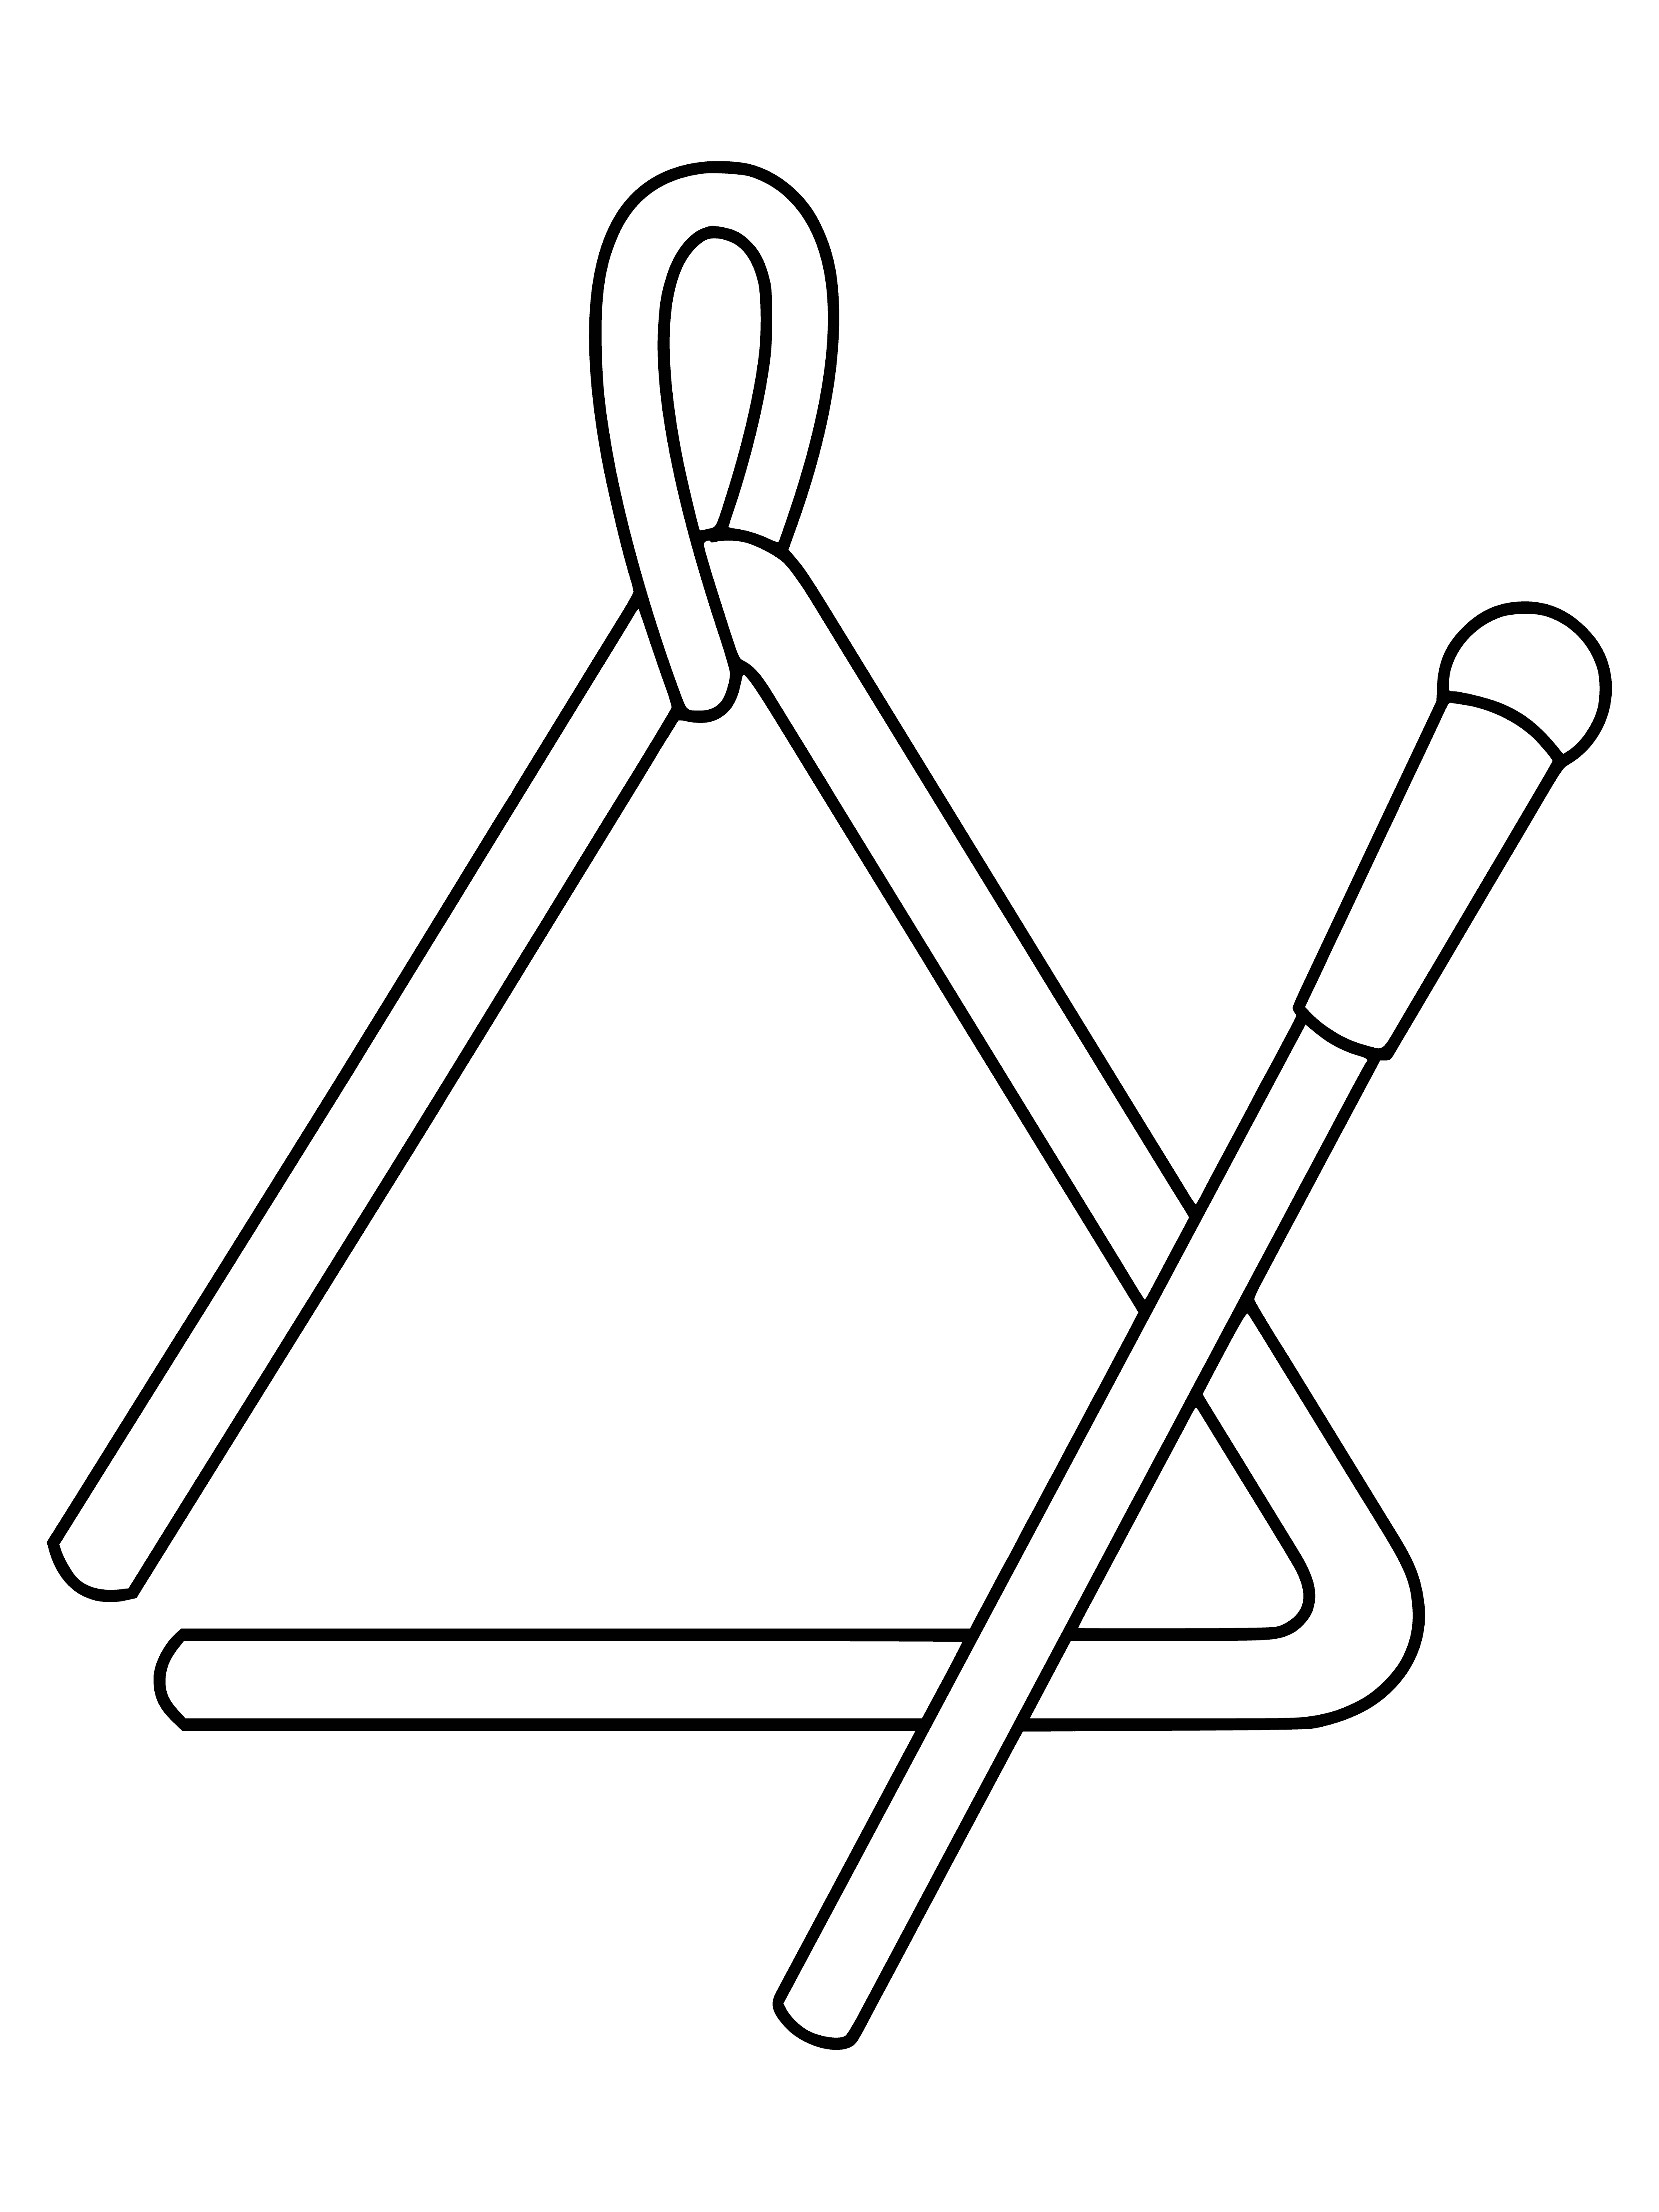 Musical triangle coloring page